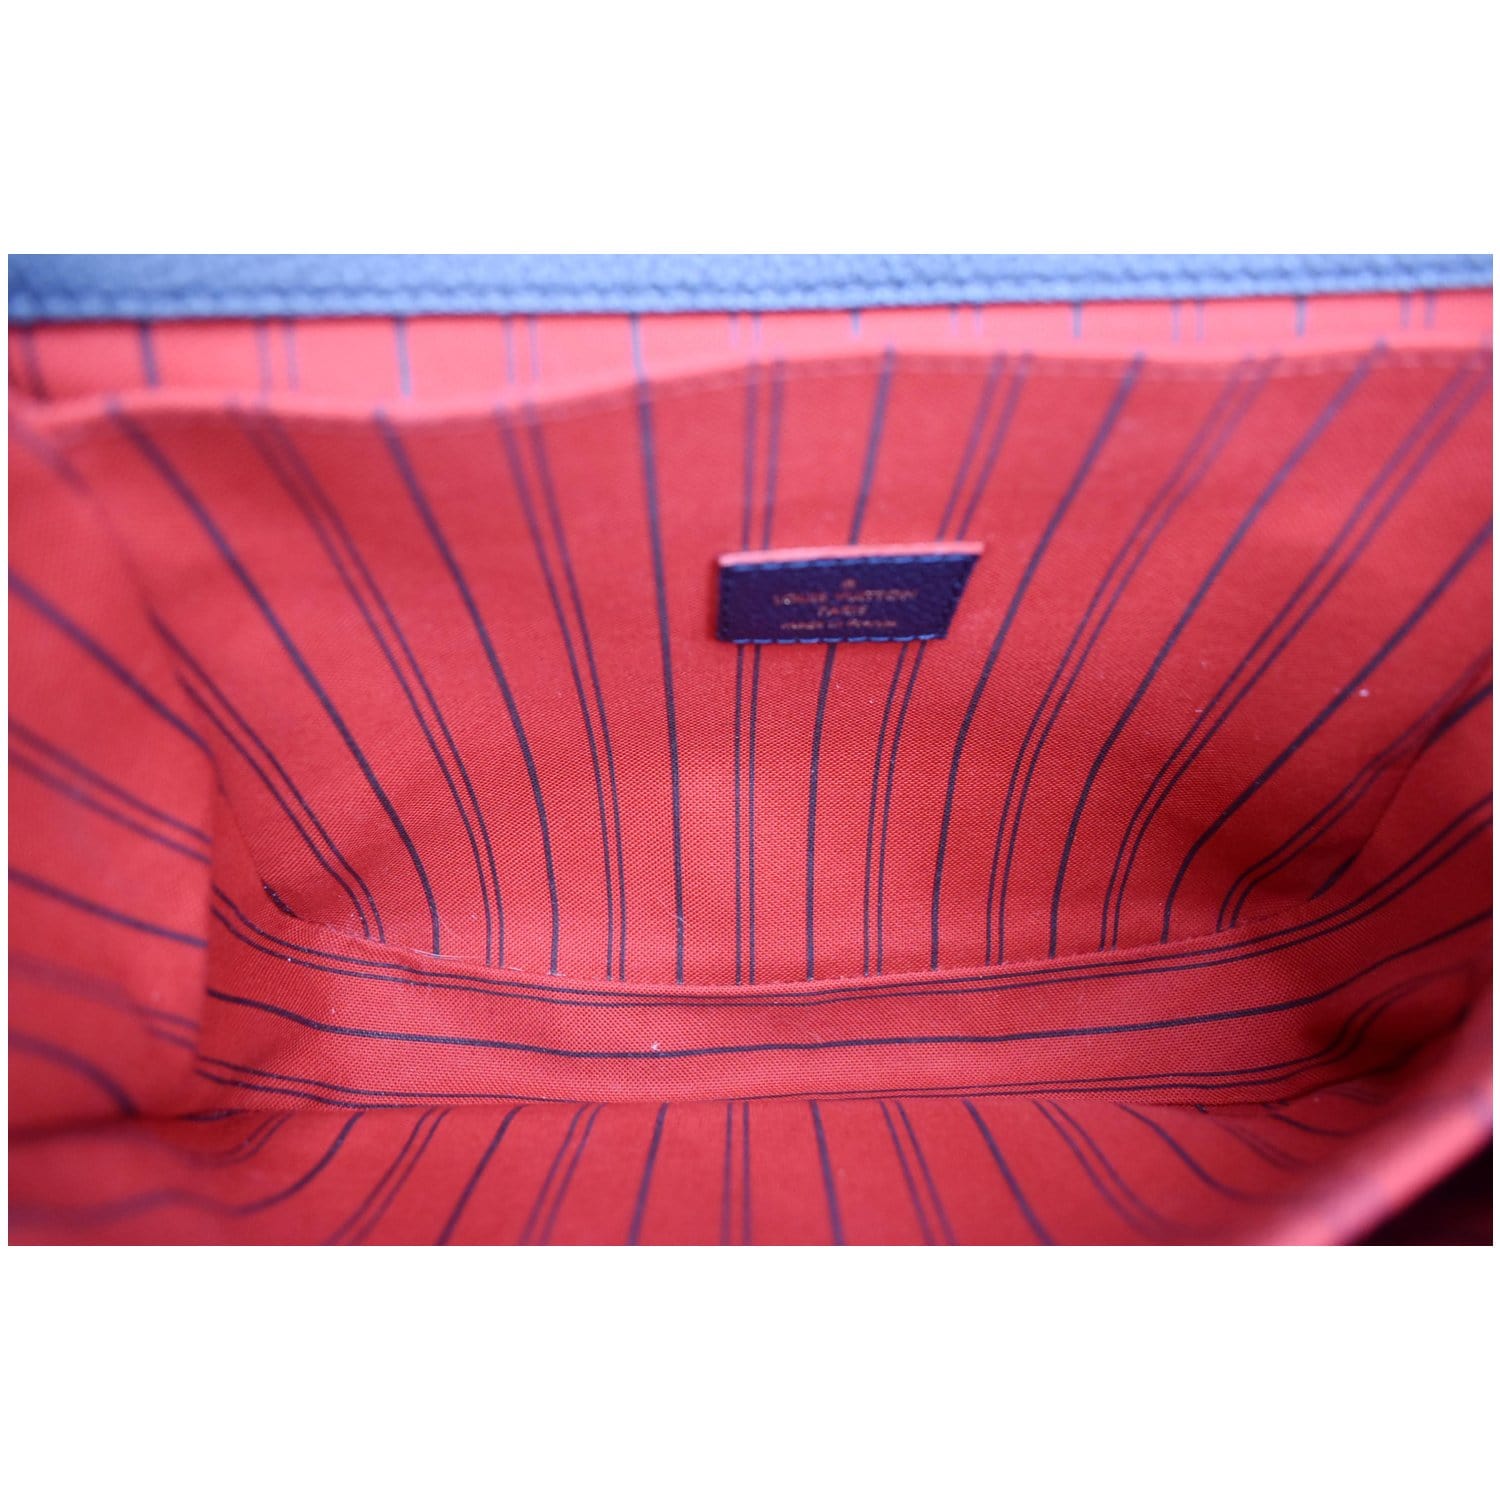 louis vuitton navy blue and red bag